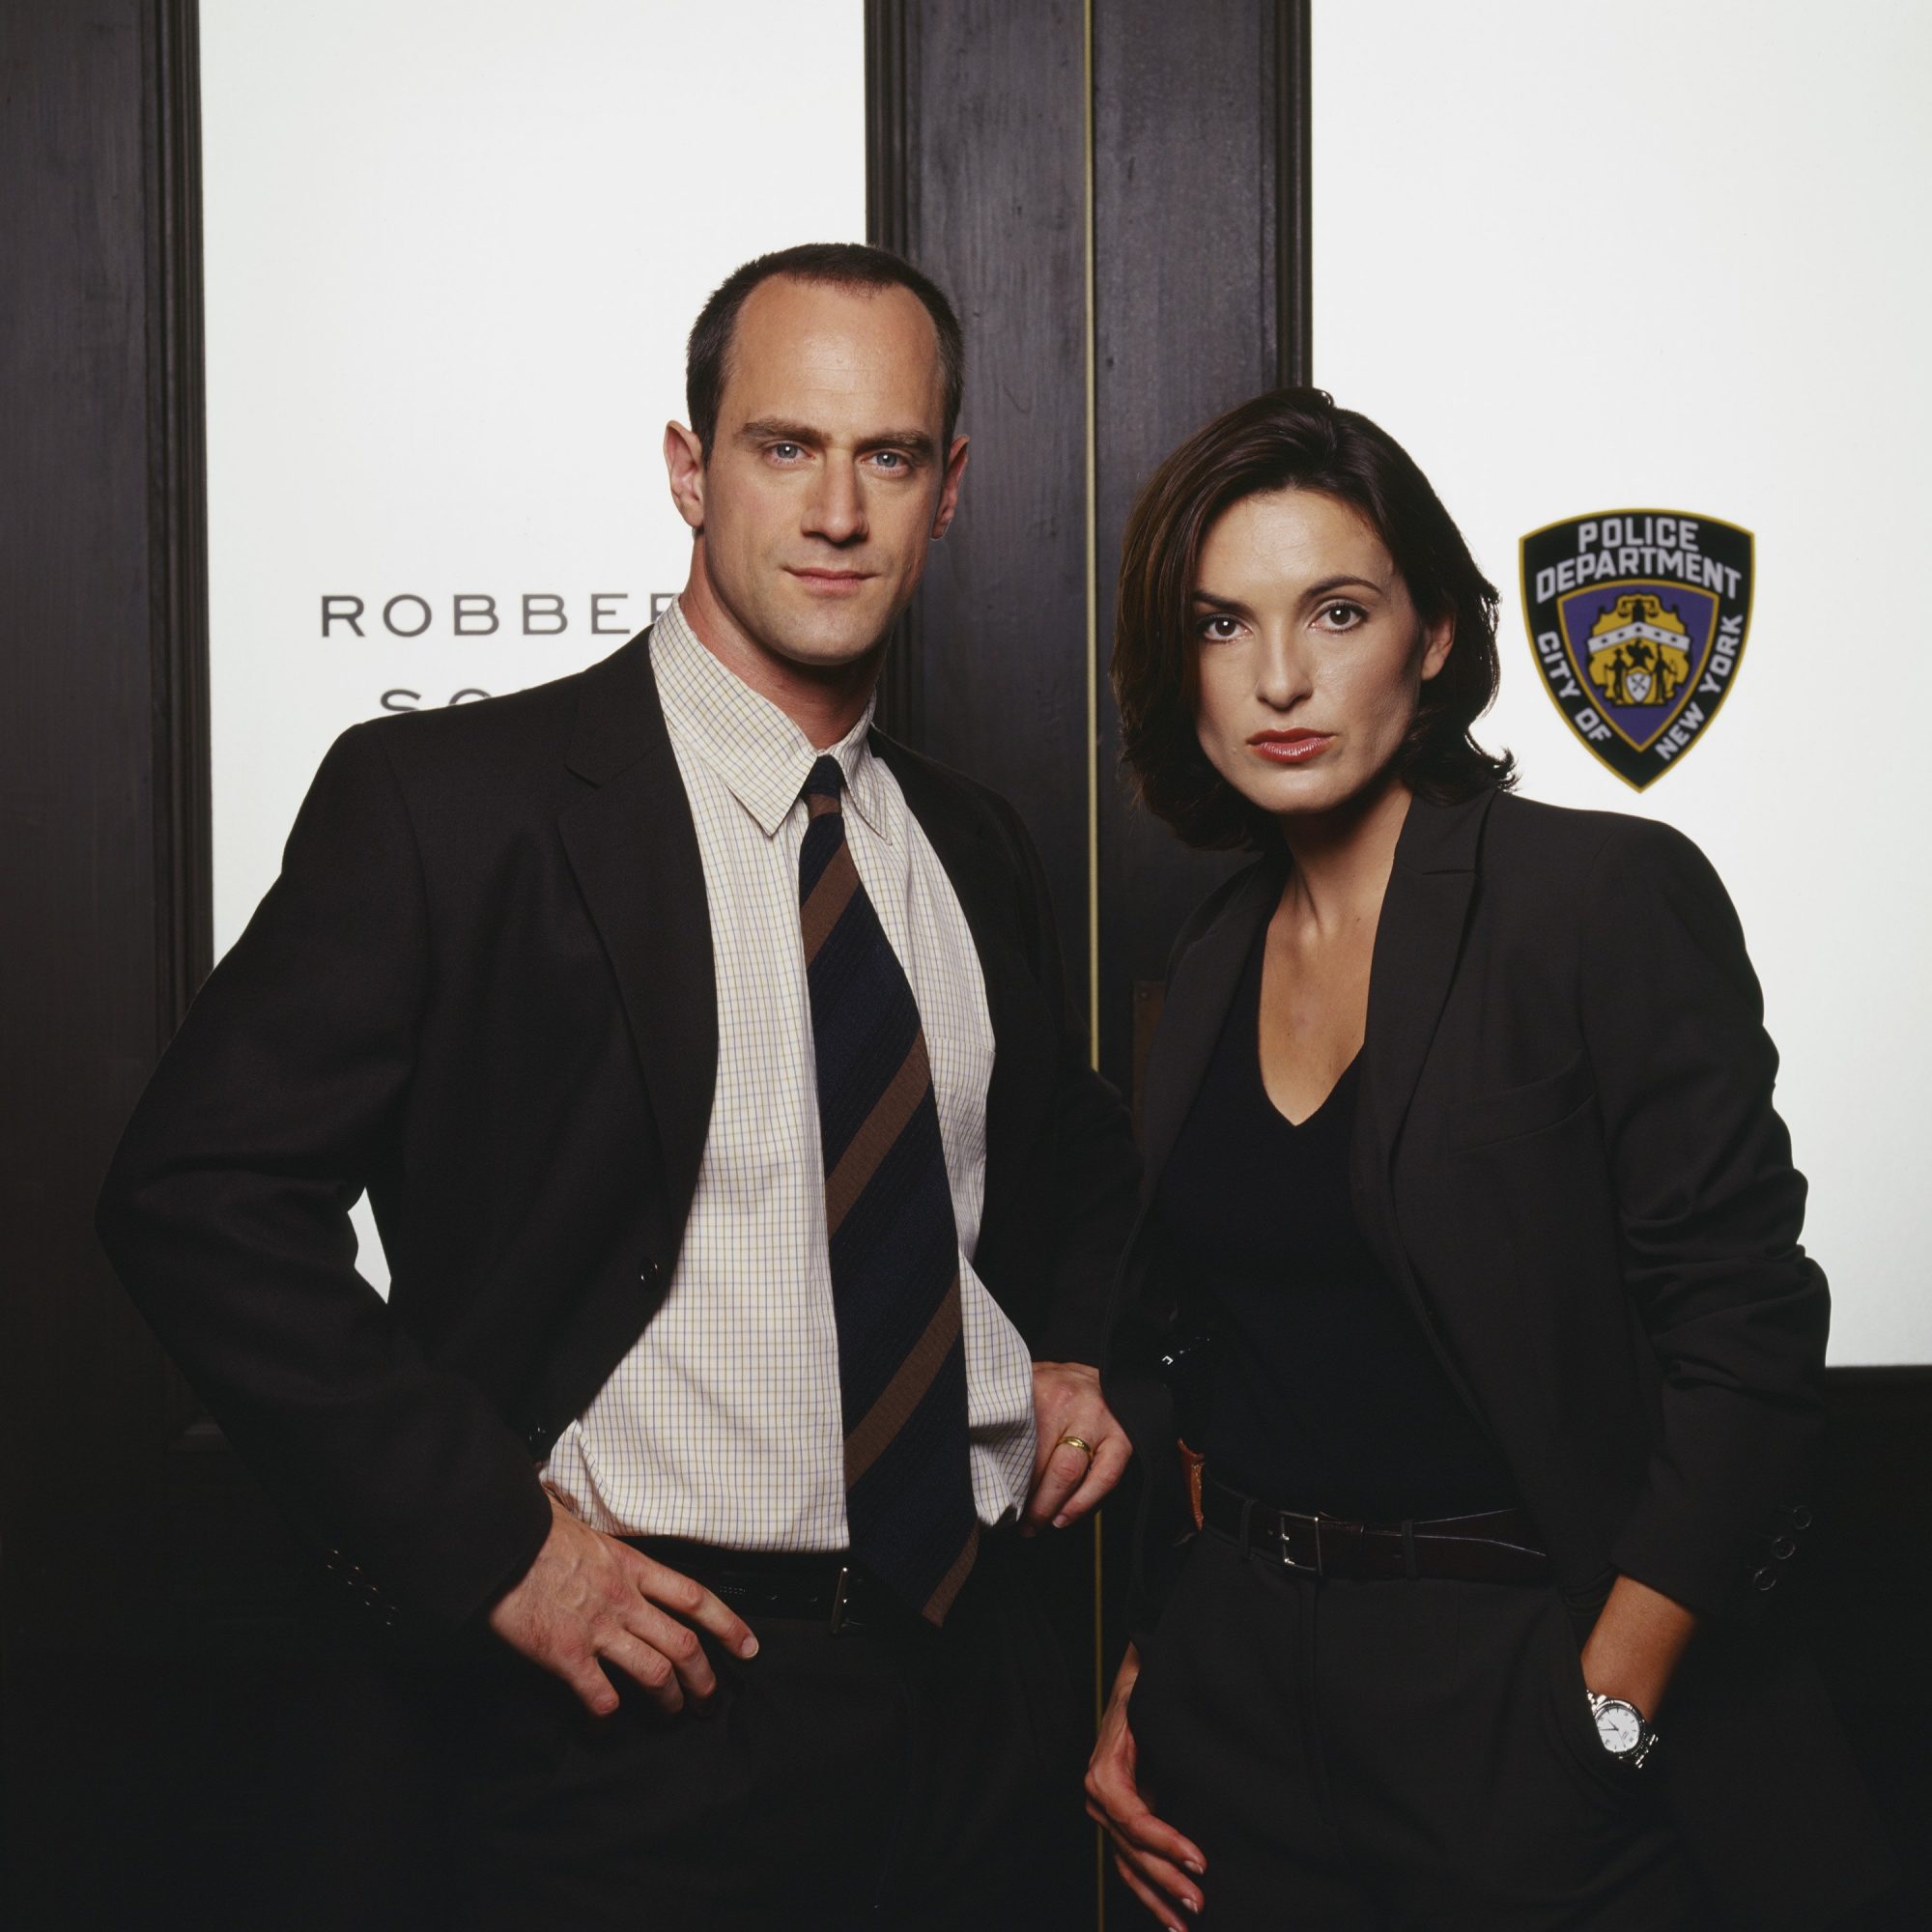 Christopher Meloni on a Potential Stabler and Benson Romance: 'There's a World of Possibility'